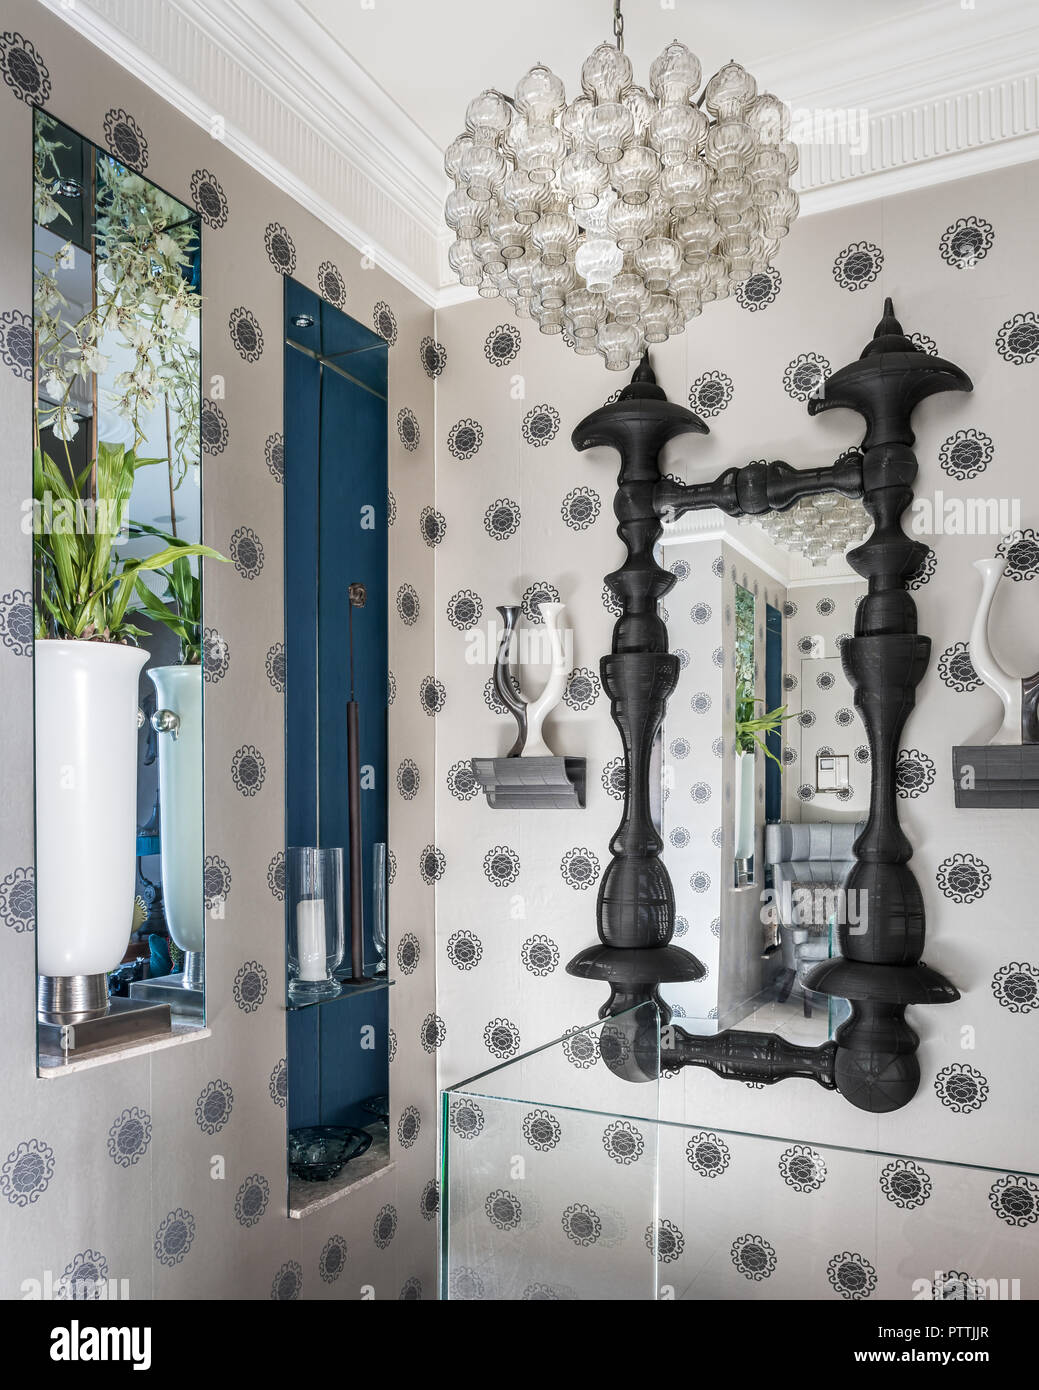 Black mirror frame and patterned wallpaper with mirror and pendant light Stock Photo